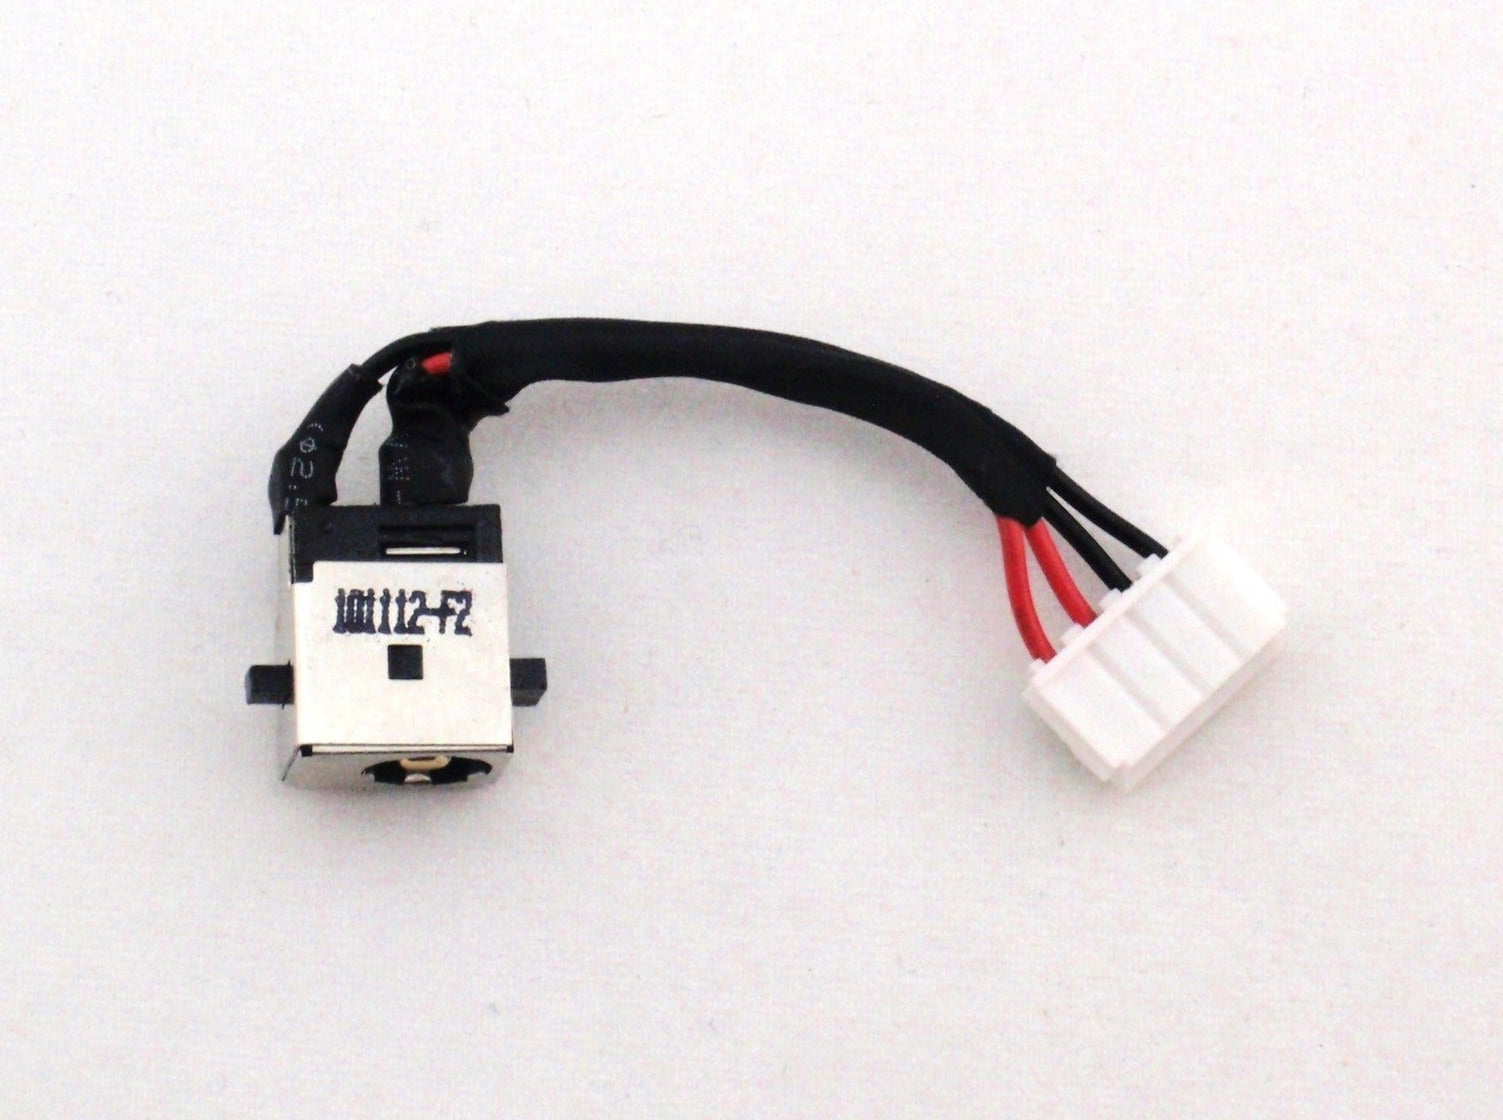 Toshiba DC In Power Jack Cable Satellite C40-B C40D-B C40DT-B C40T-B C45-B C45D-B C45DT-B C45T-B L40-B L40D-B L40DT-B L40T-B L45-B L45D-B L45DT-B L45T-B